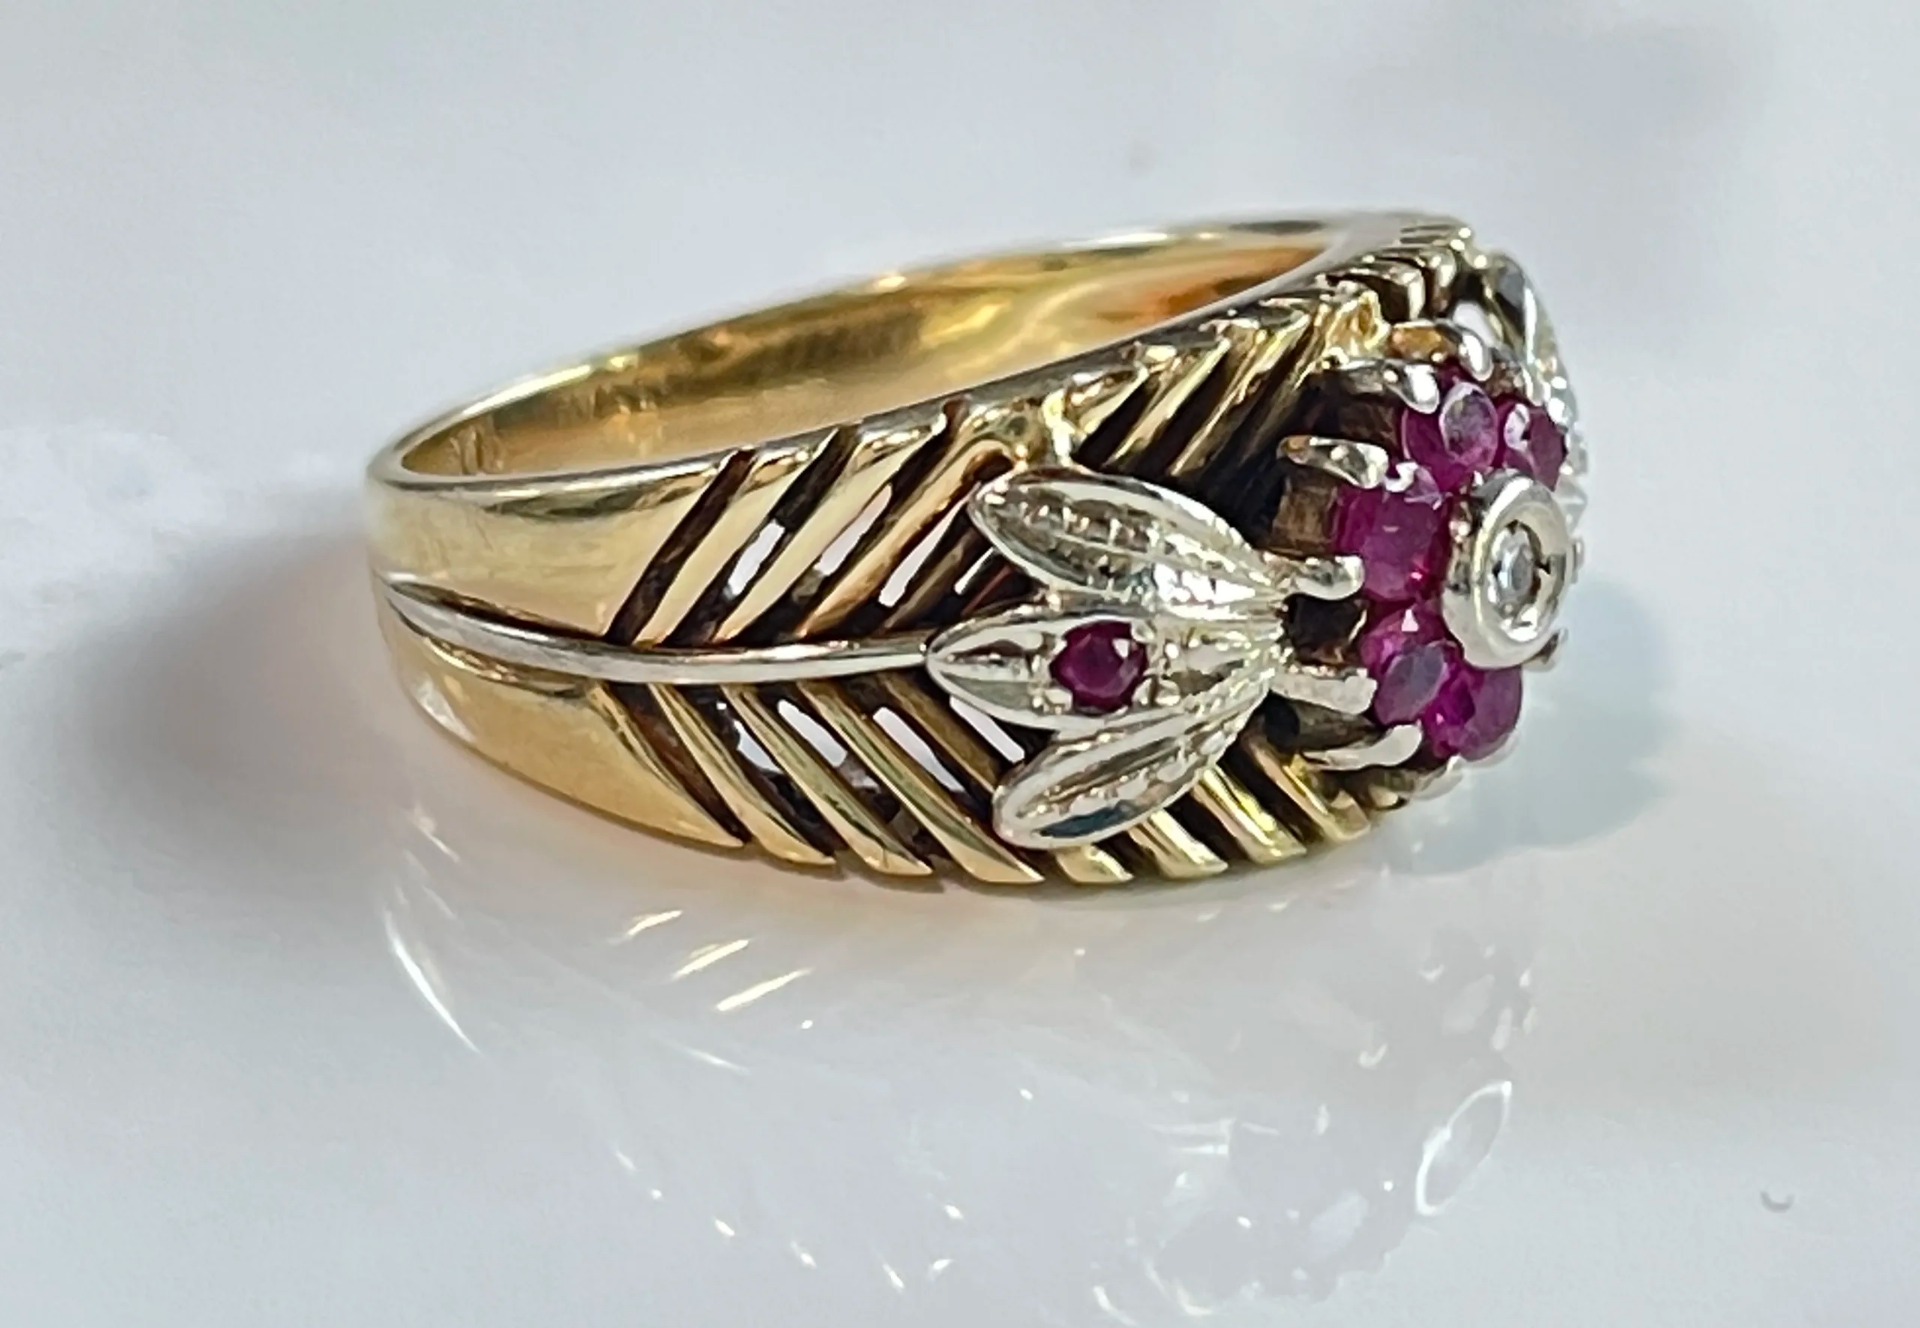 Vintage Rubies with Diamonds ring, 18ct. gold - Image 3 of 4